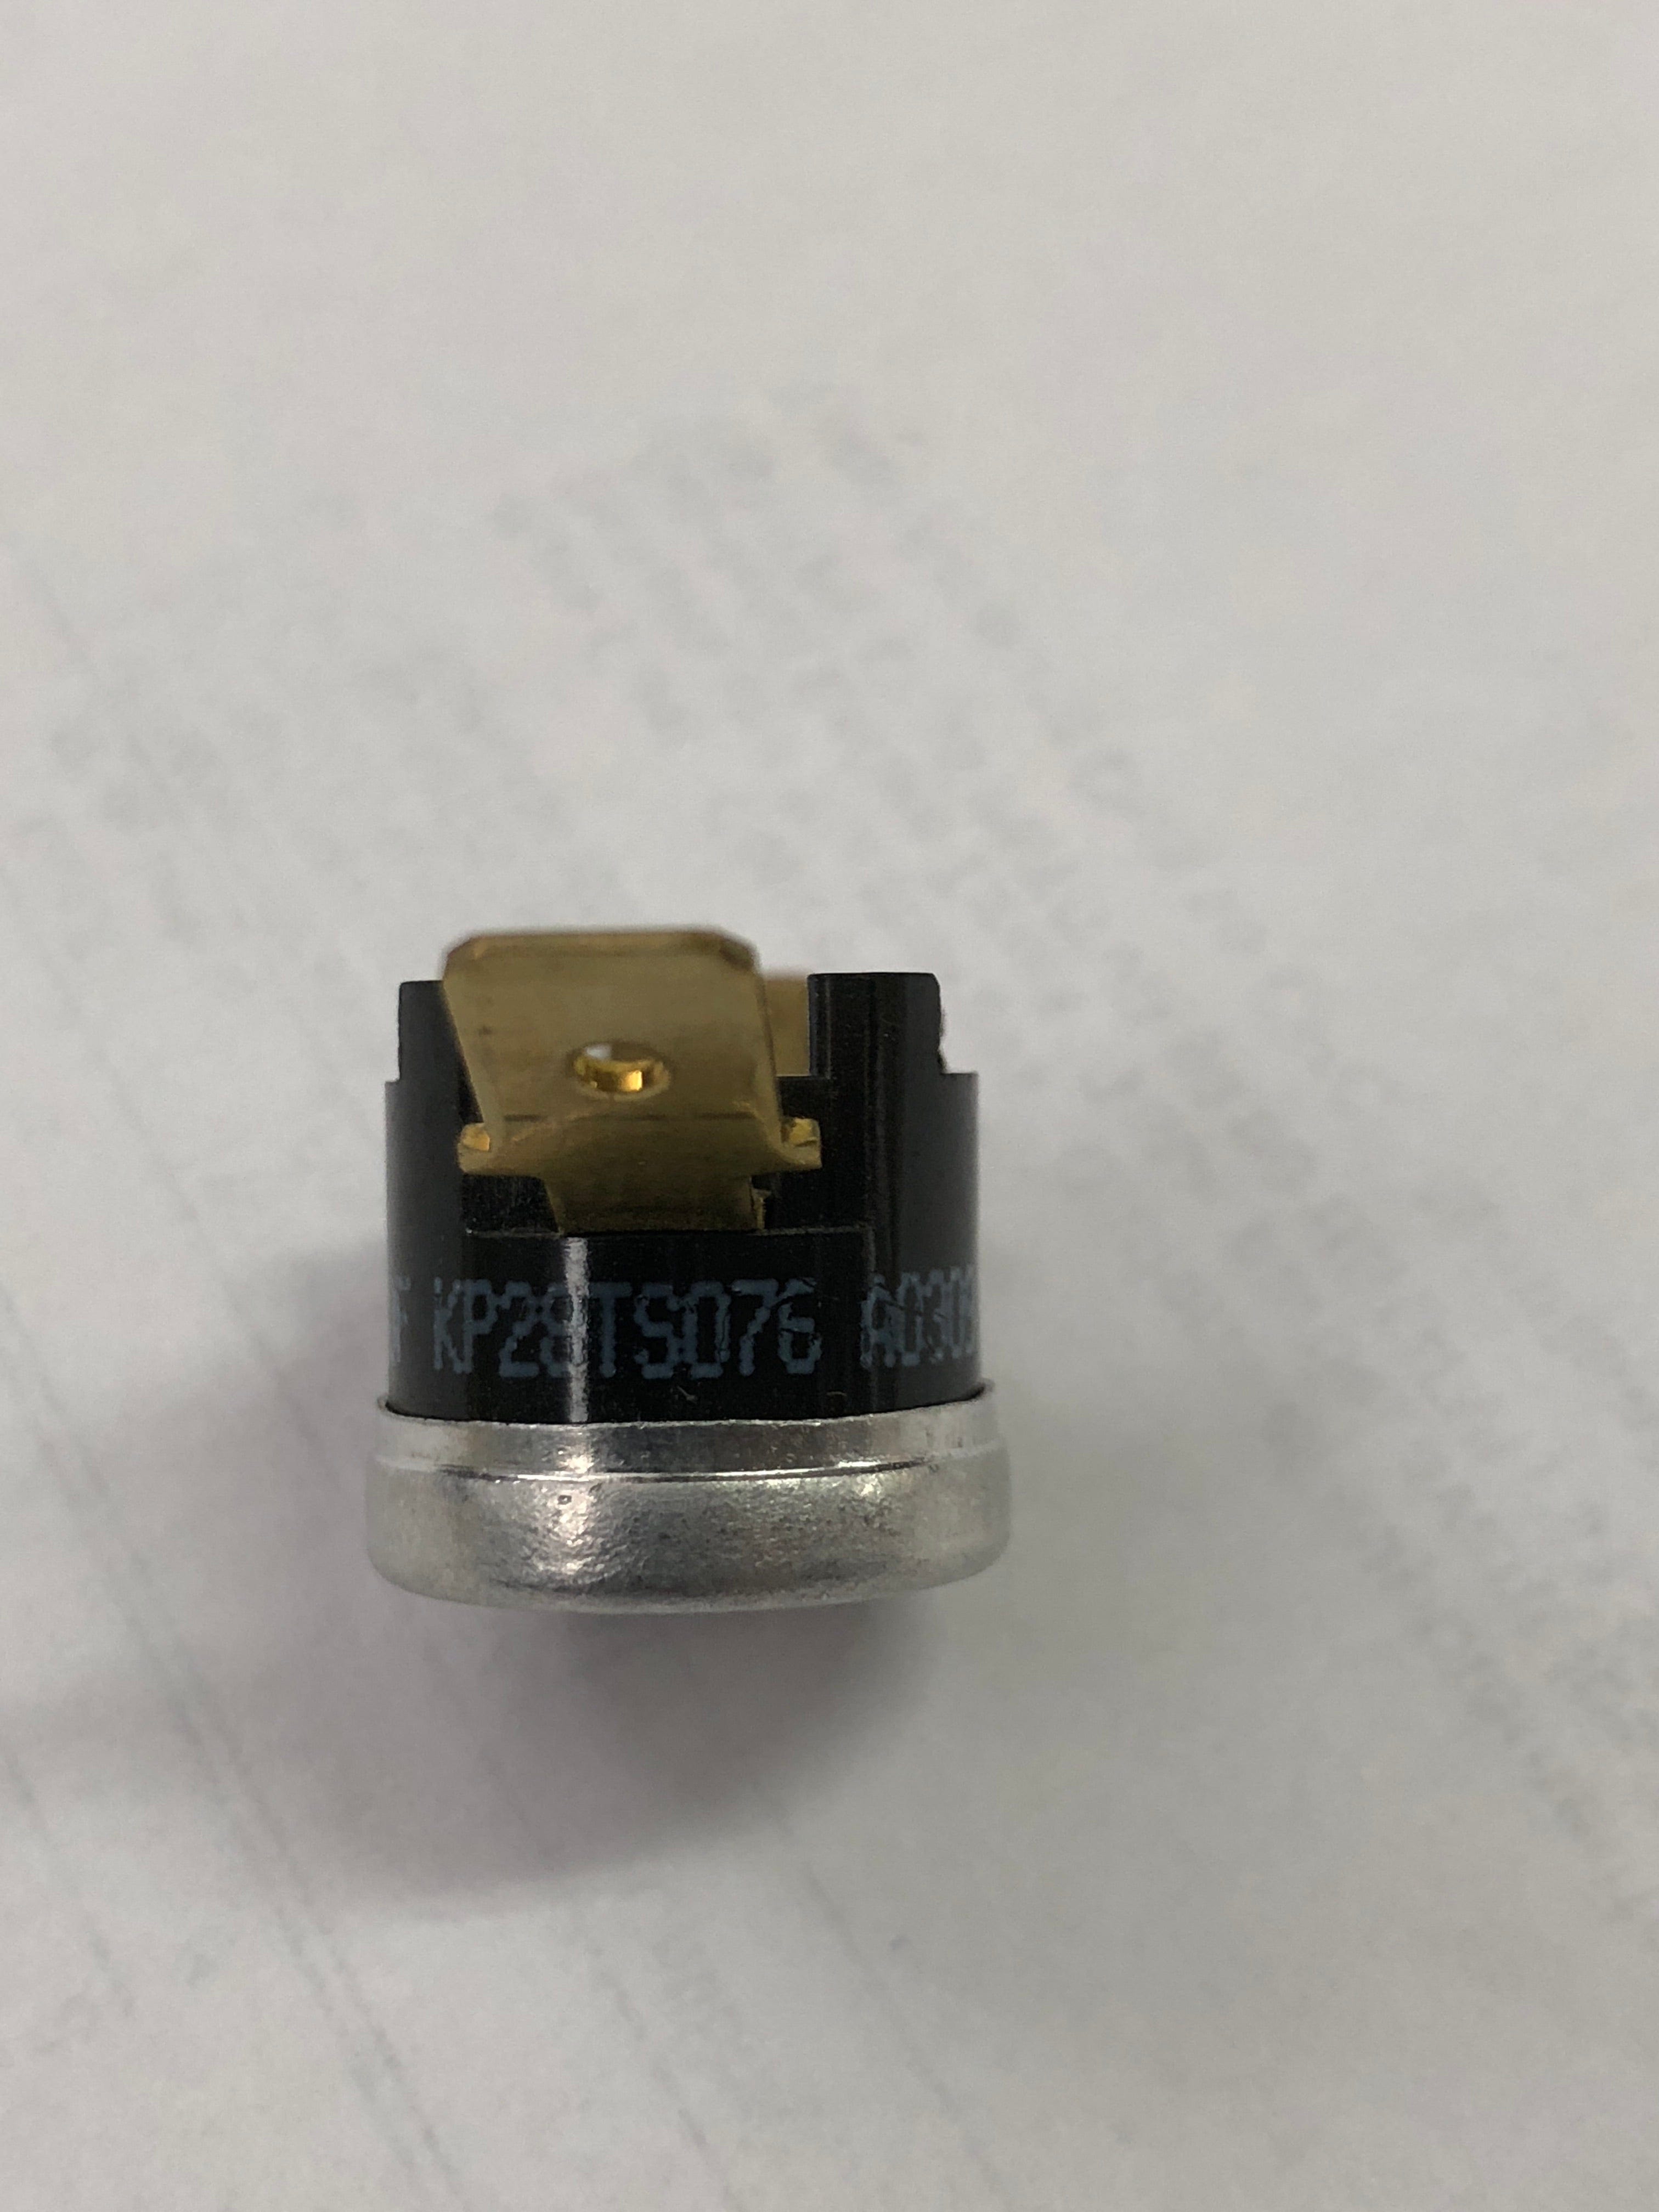 Thermostat kp28ts076 canada westbend